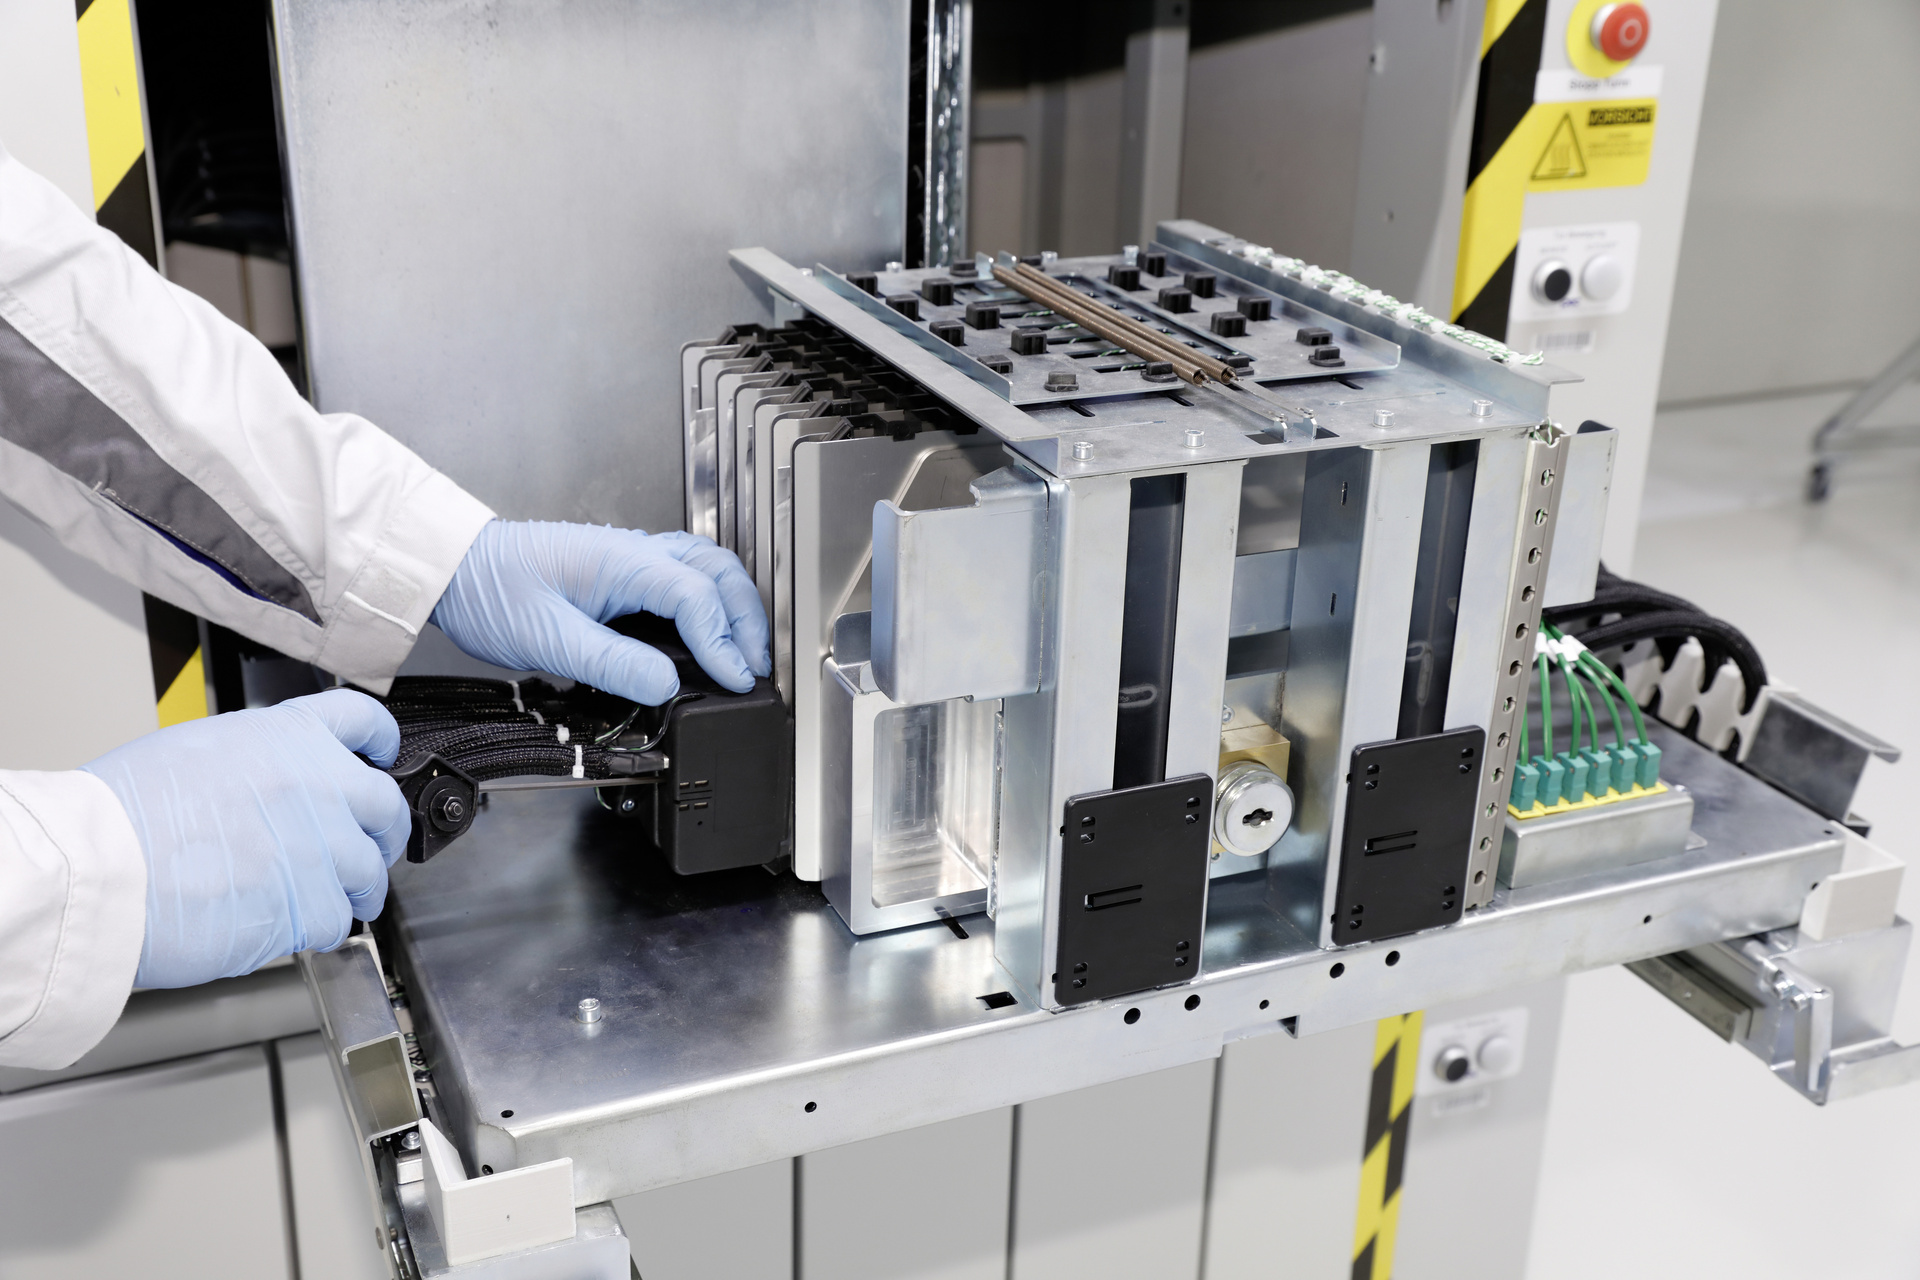 Volkswagen Group Starts Battery Cell Development And Production